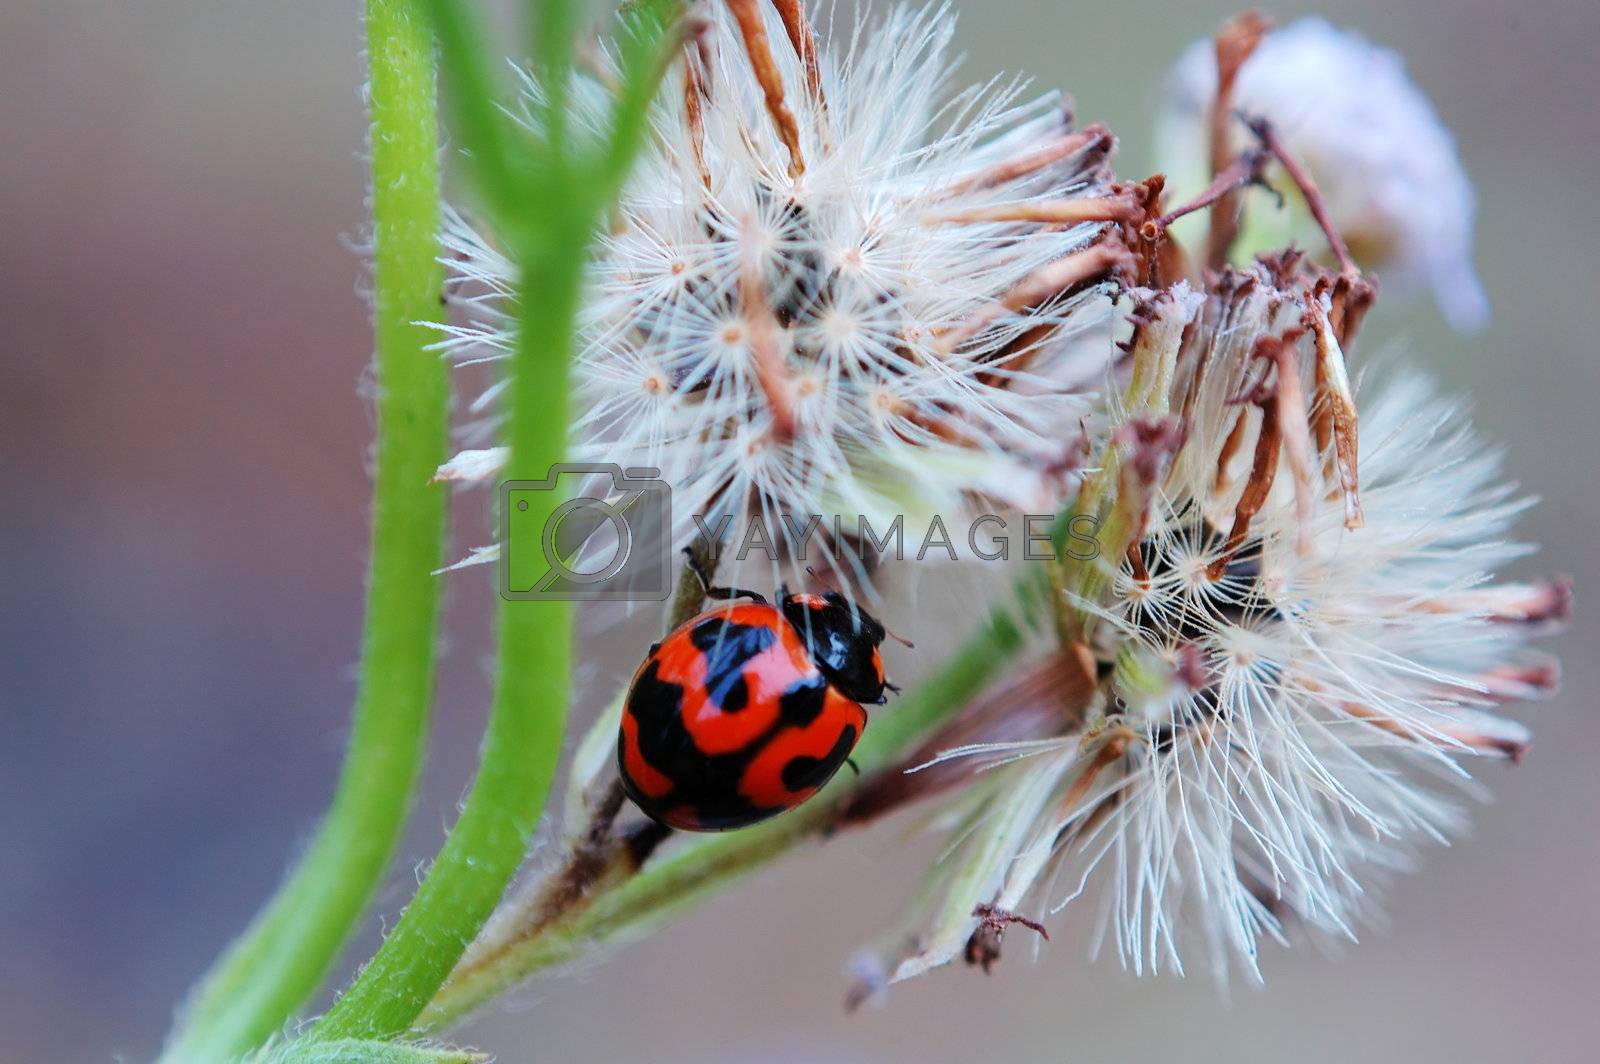 Royalty free image of Ladybird and seeds by tito